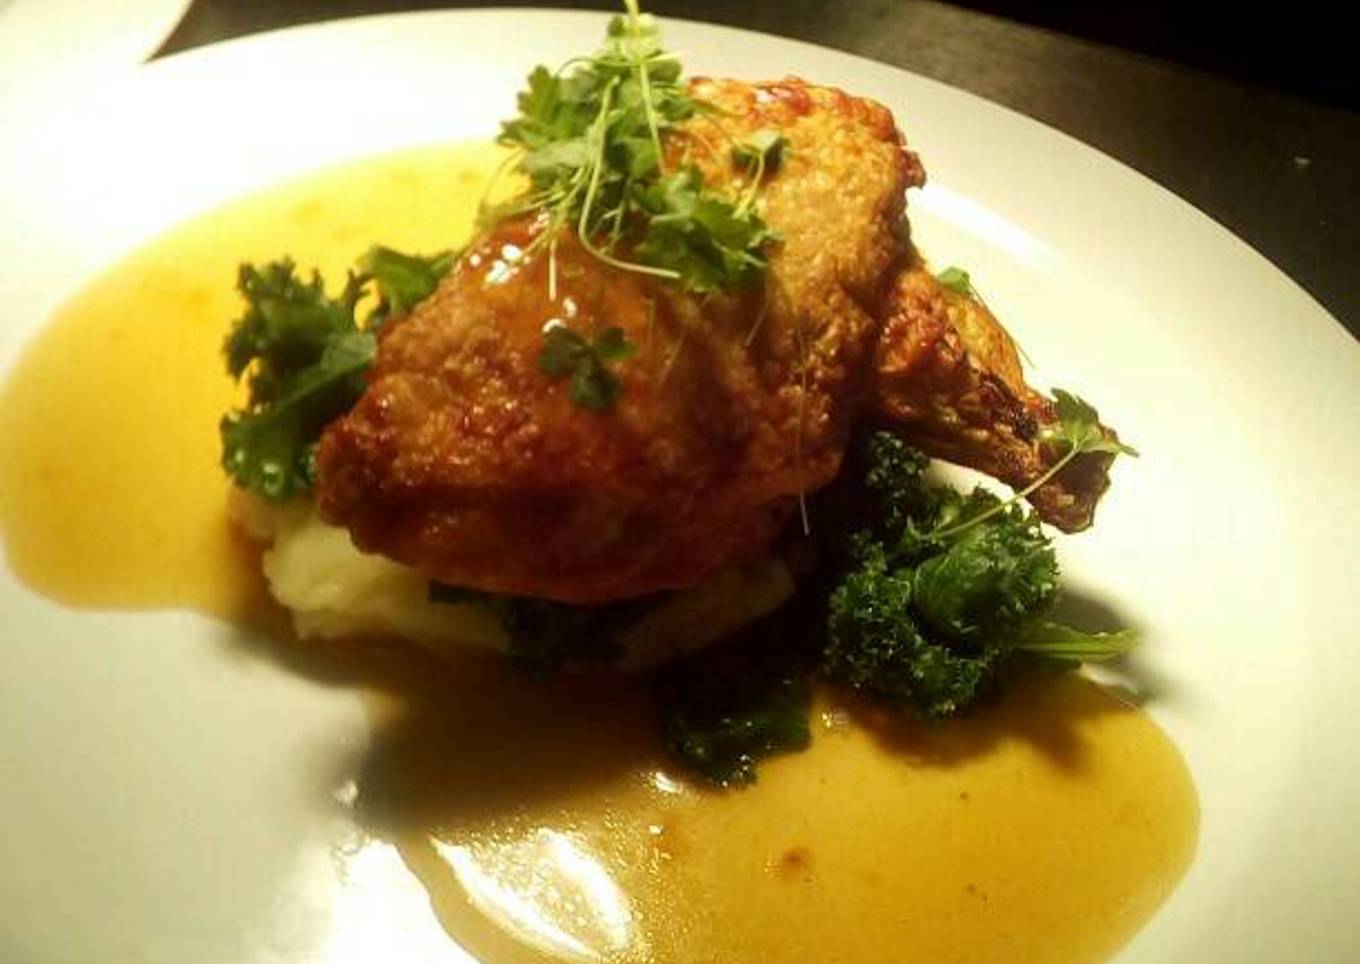 Garlic and thyme chicken, khale and jugras pomme puree